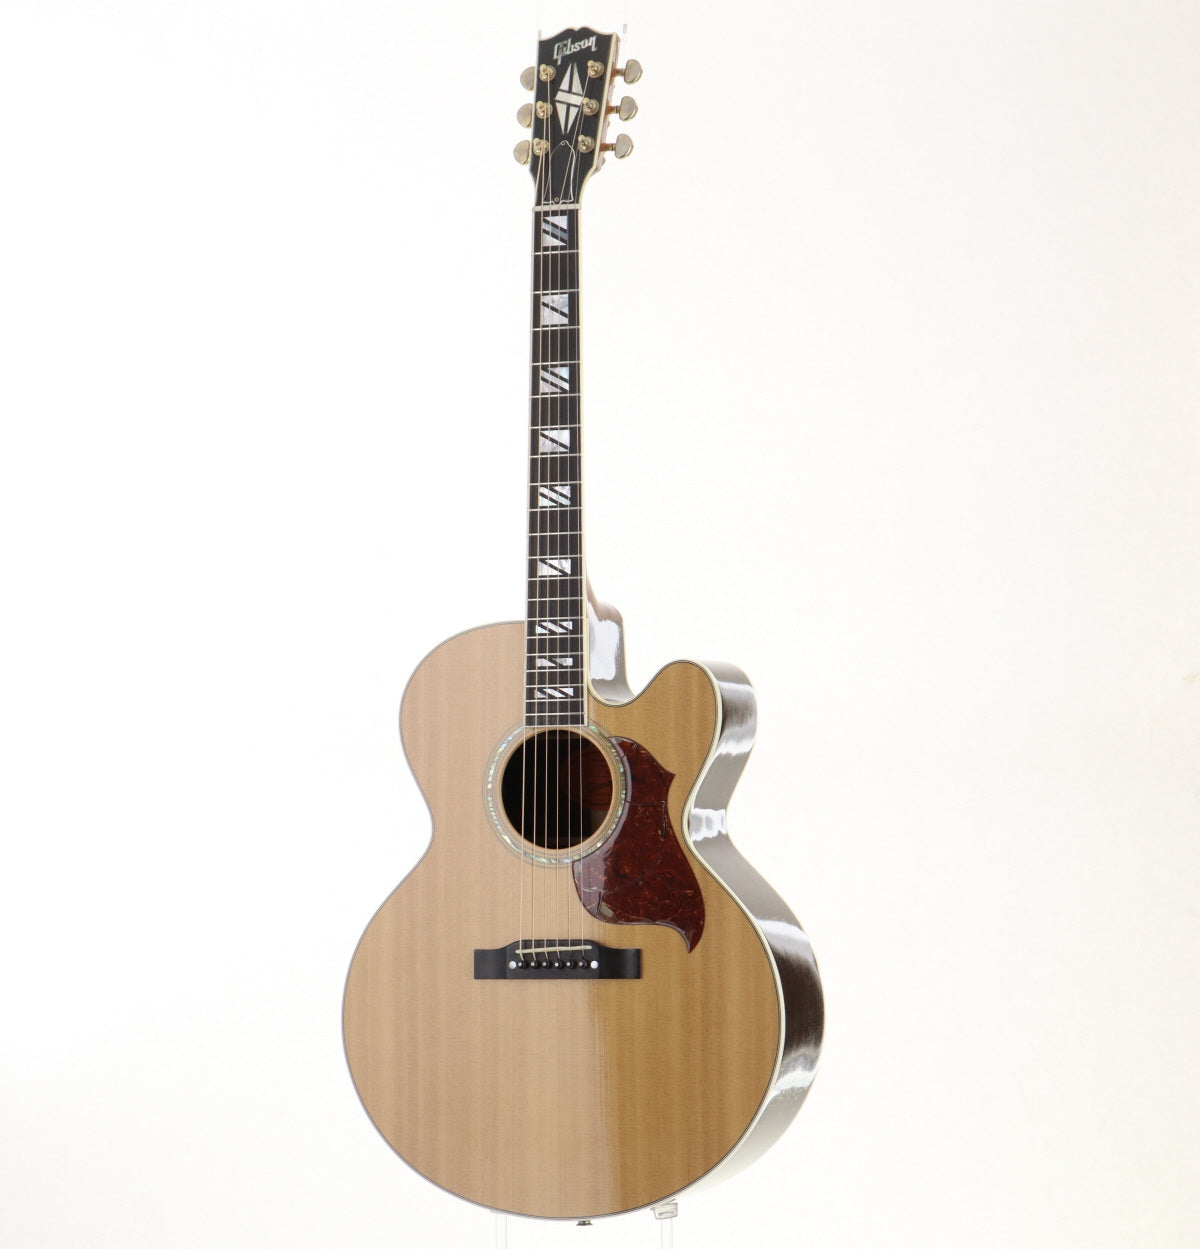 [SN 02366064] USED Gibson / J-185 EC Rosewood Antique Natural 2006 [09]